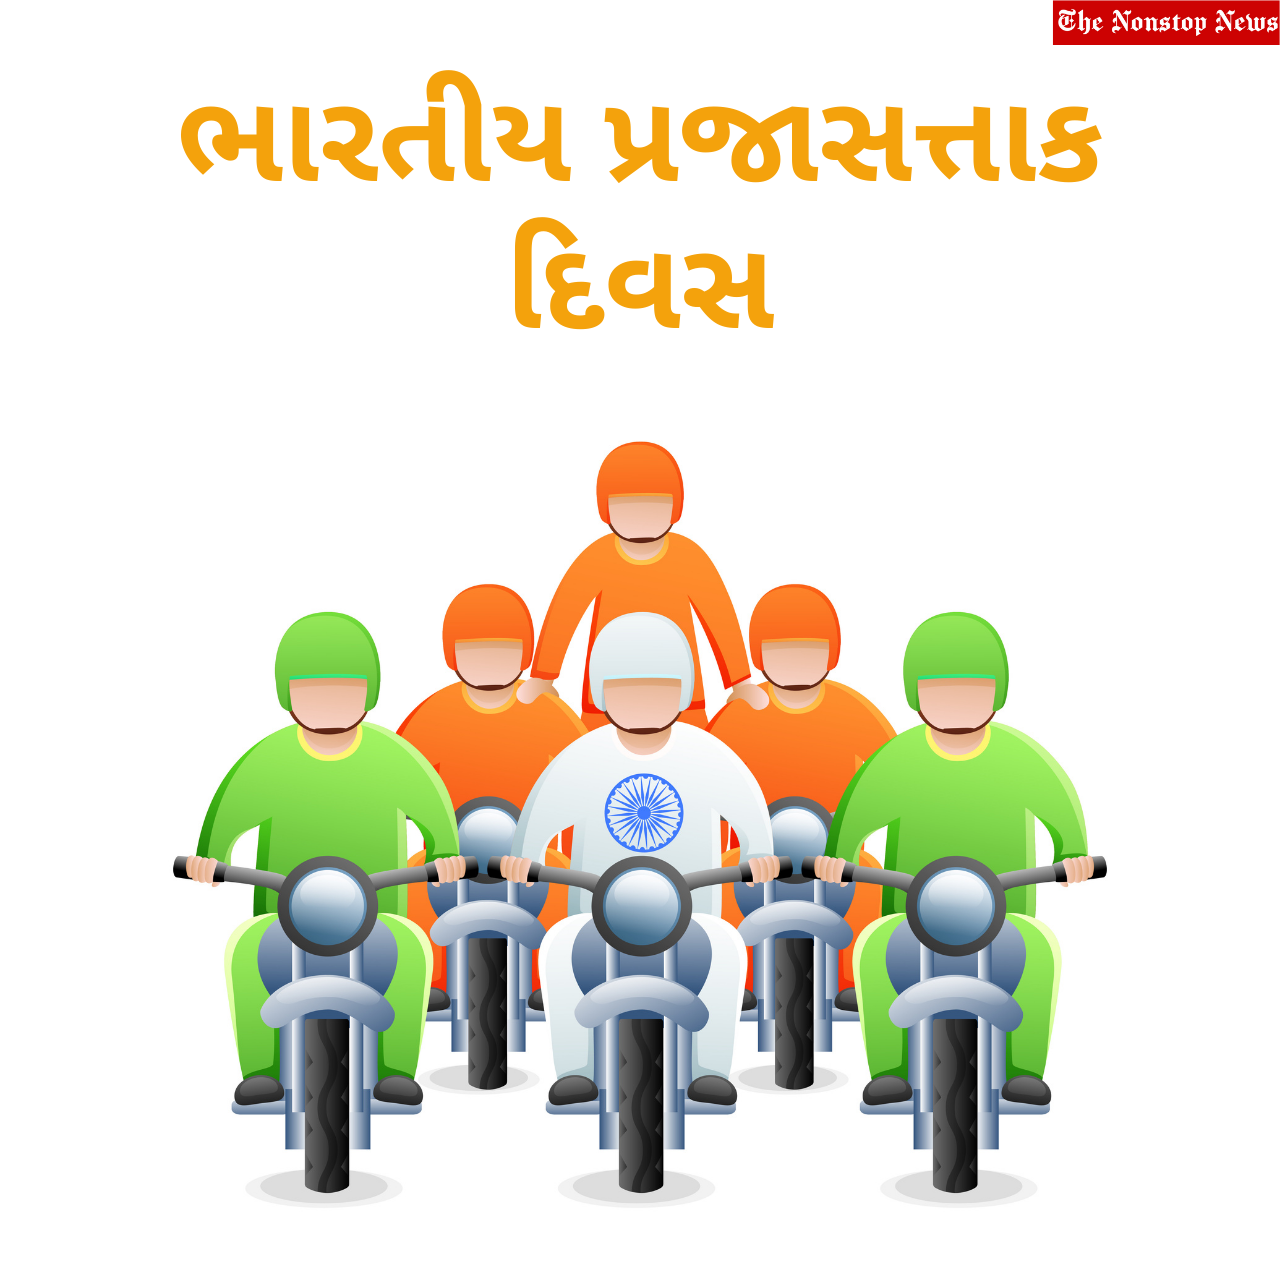 Happy Indian Republic Day 2022 Gujarati Wishes, Quotes, HD Images, Messages, Shayari, Greetings to greet your friends and relatives